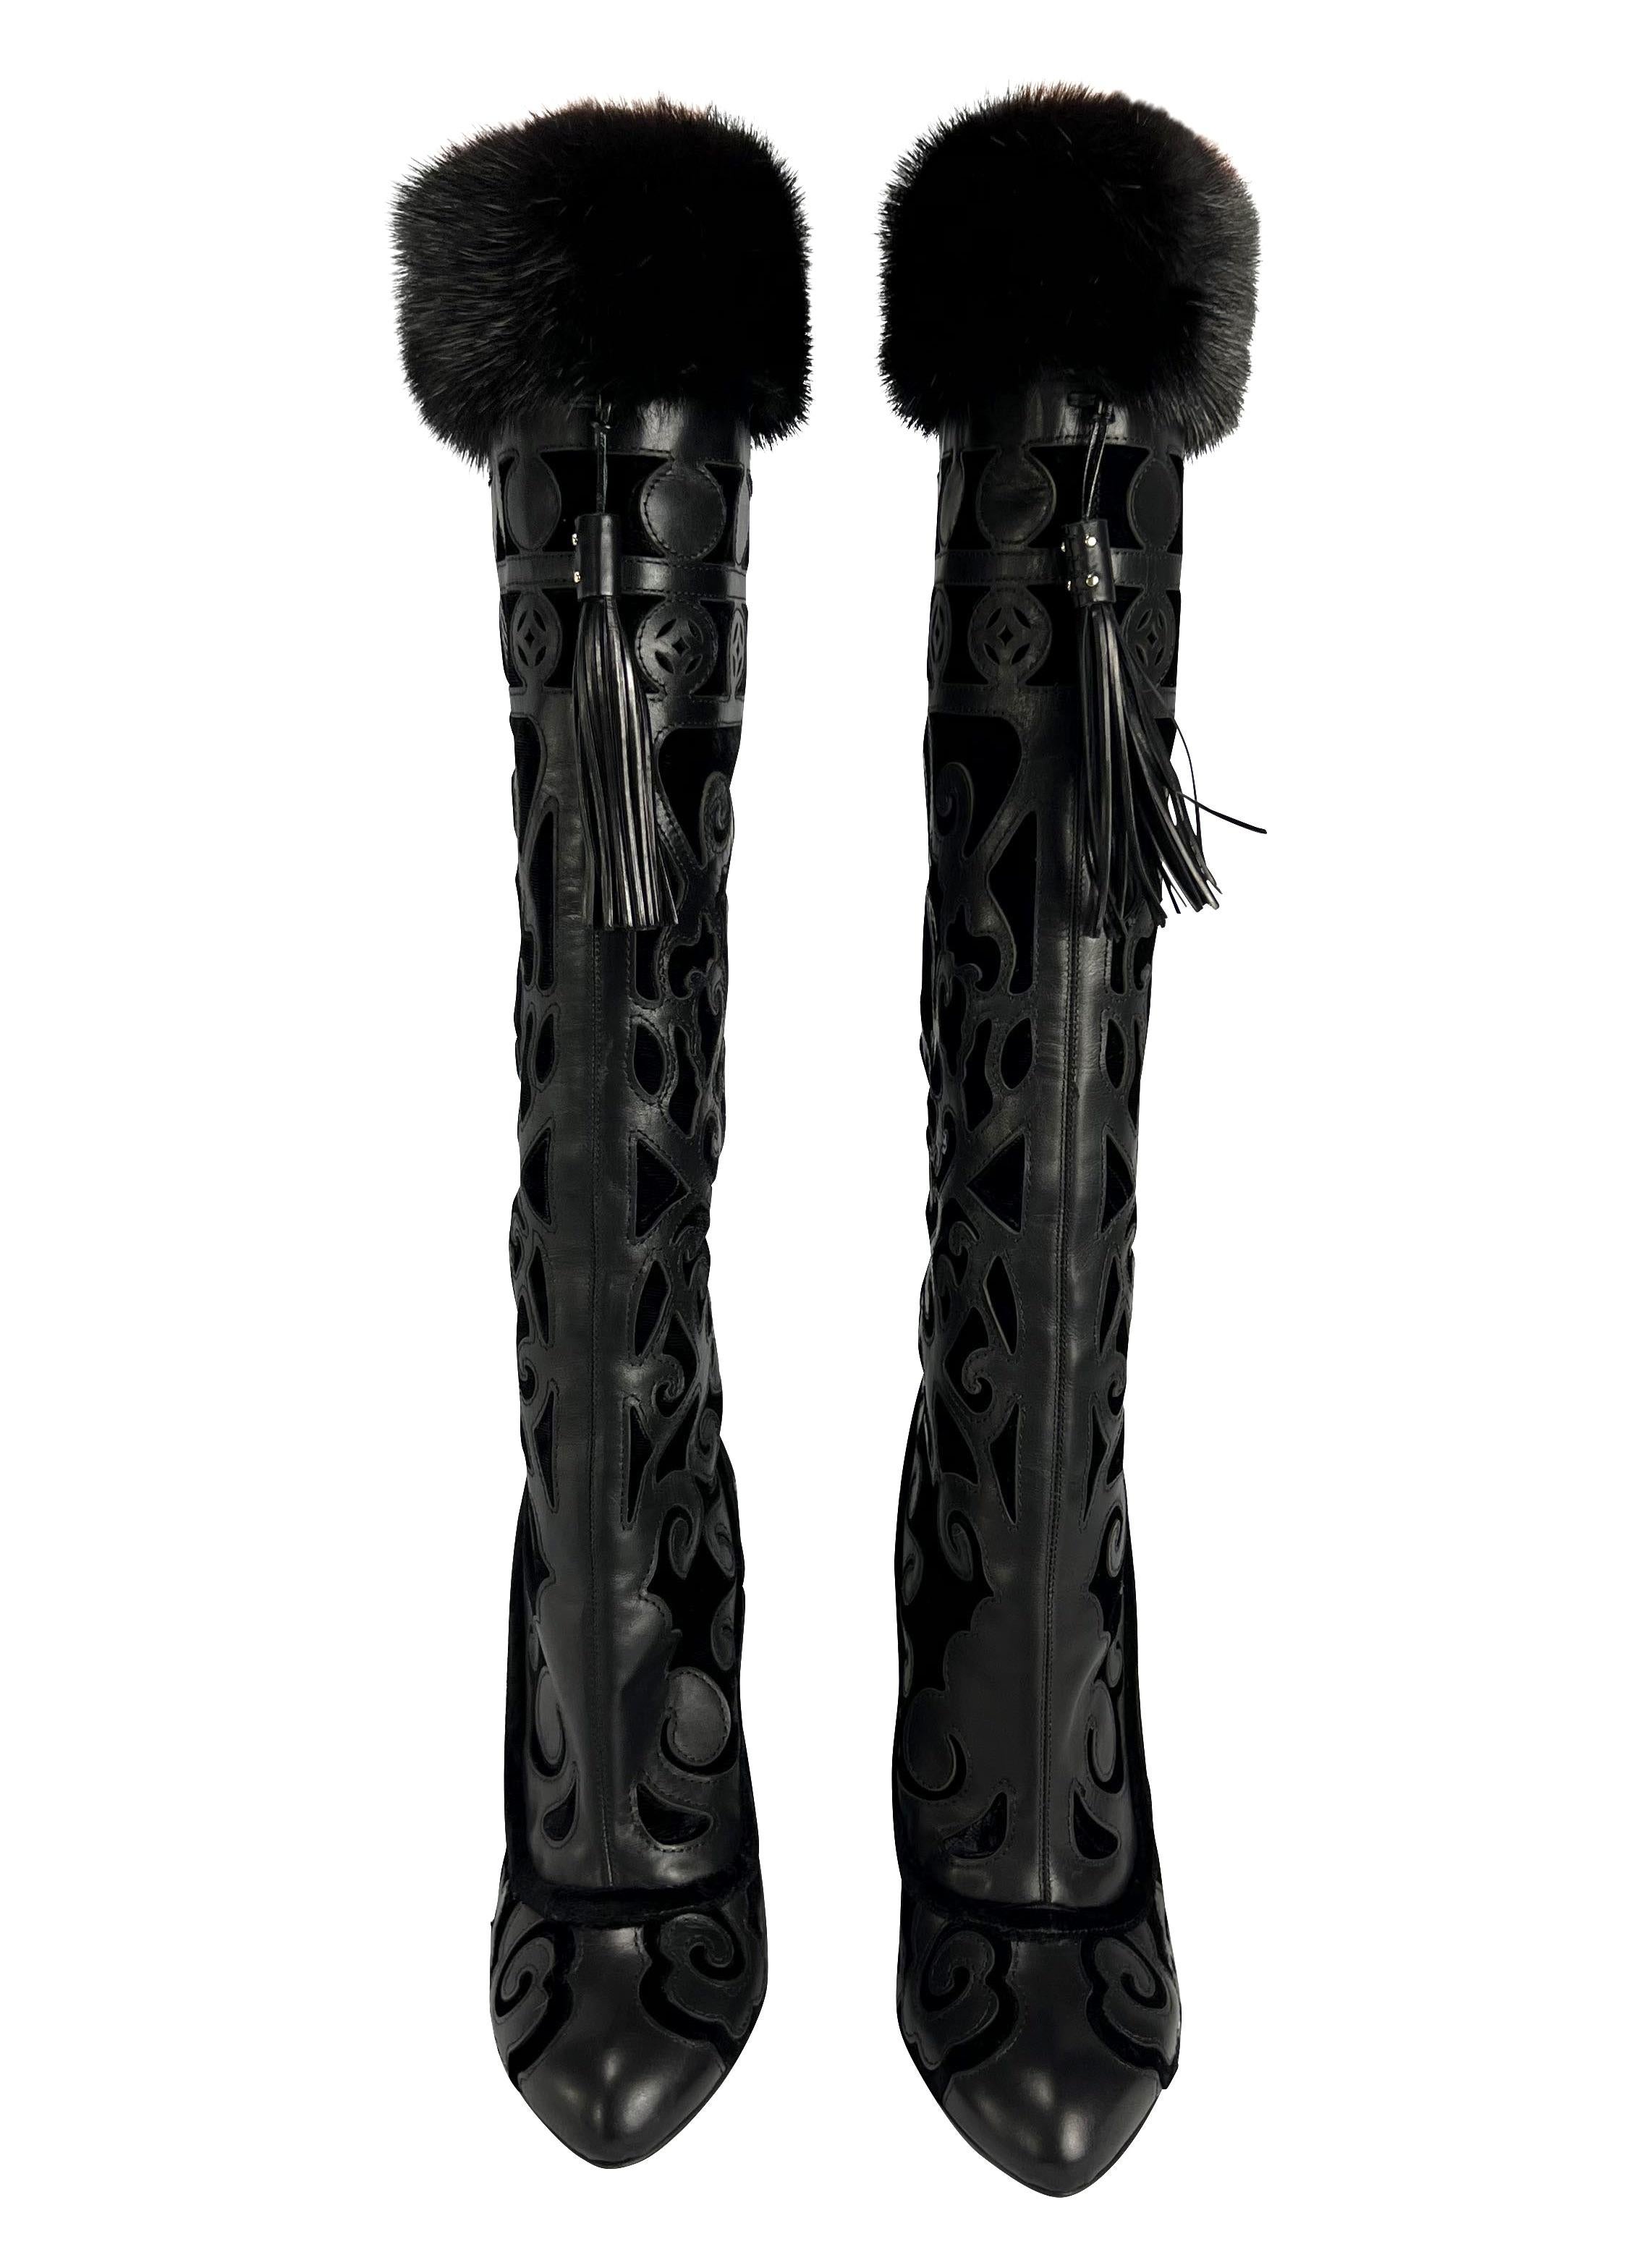 Presenting a pair of detailed leather and fur Yves Saint Laurent Rive Gauche wedge boots, designed by Tom Ford. These boots are a part of the Fall/Winter 2004 collection and debuted on the runway on look number 16 modeled by Yasmin Warsame. This